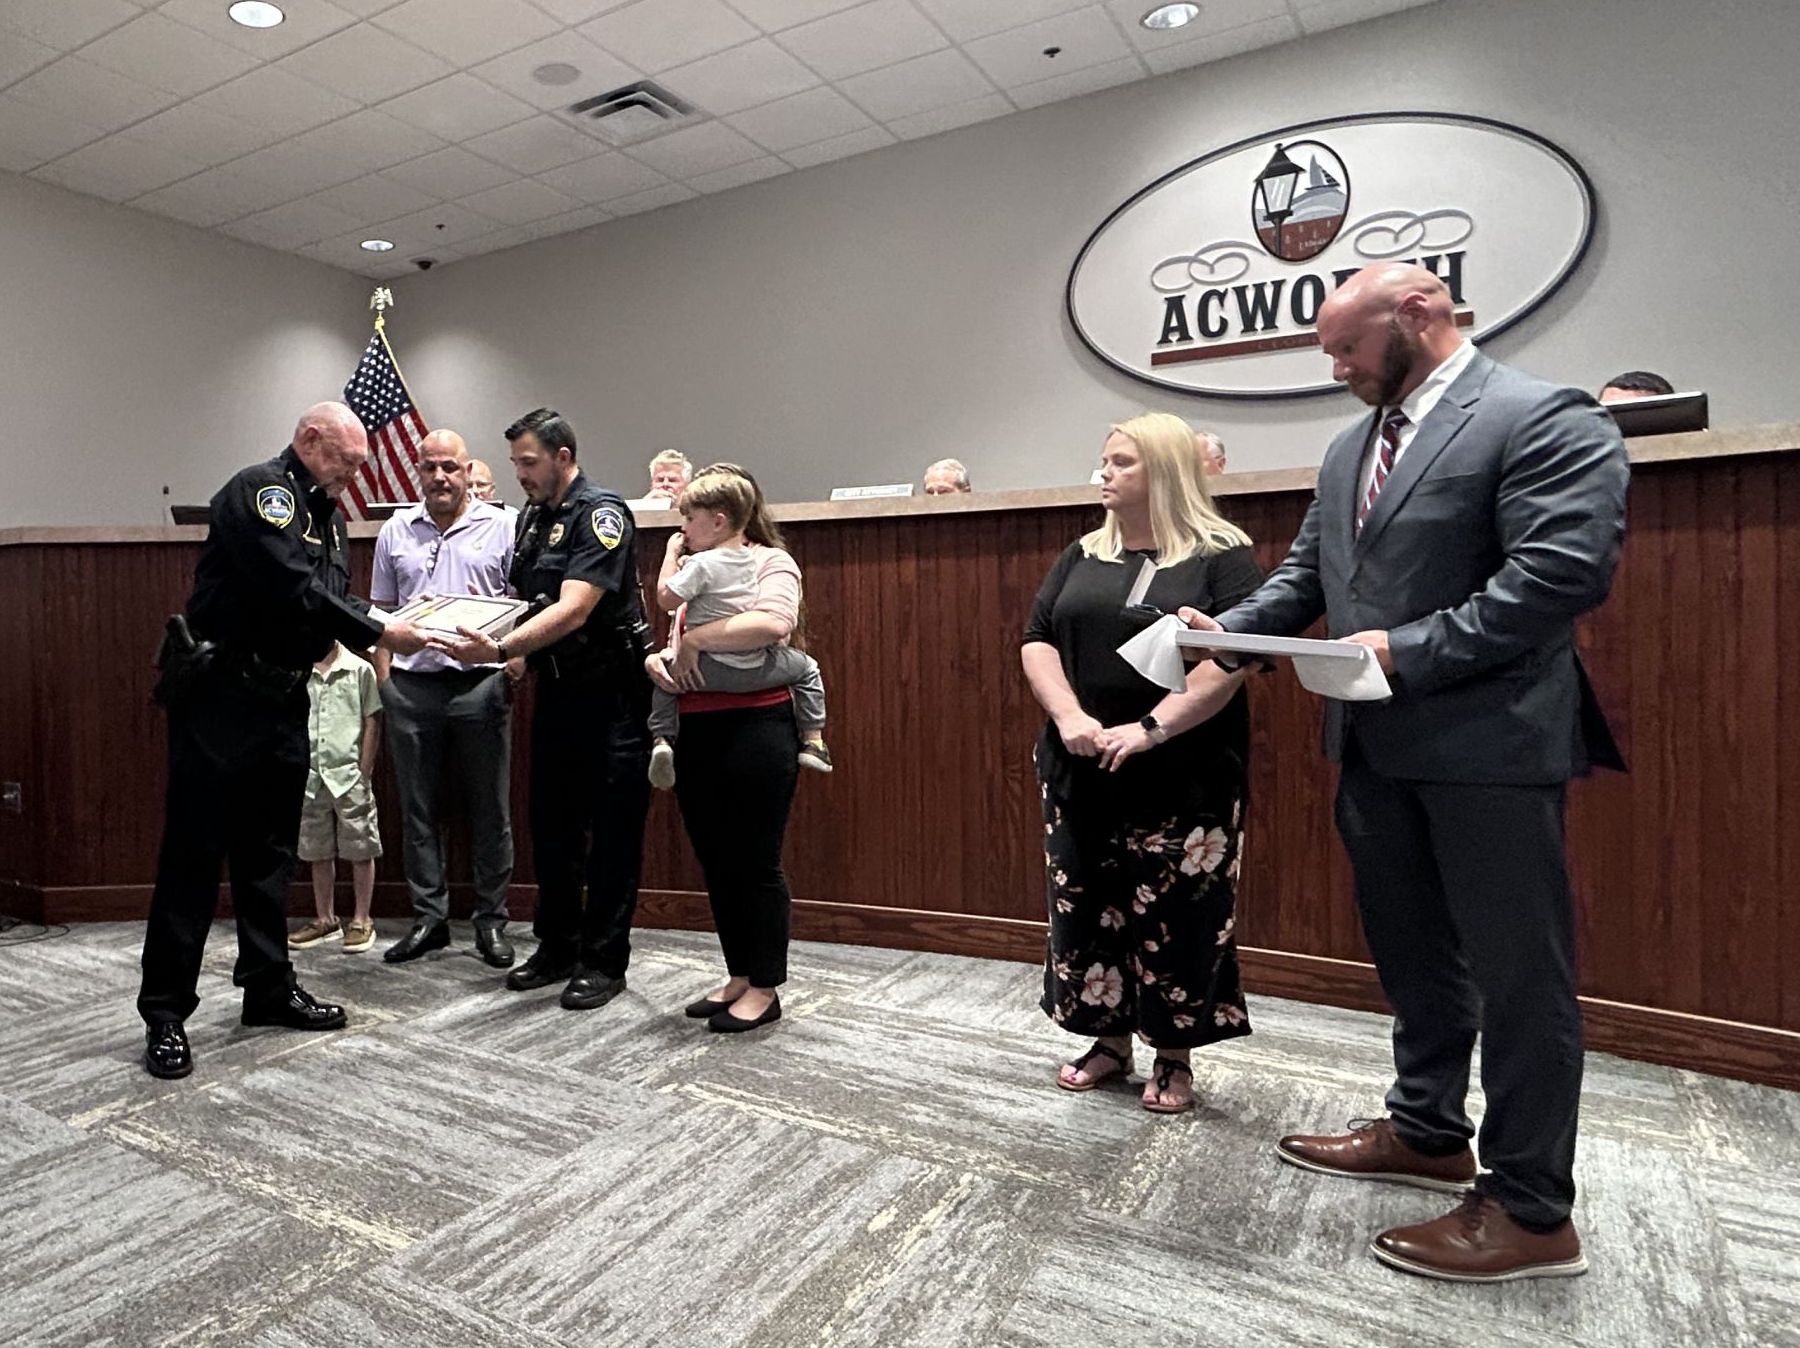 Image Detective Hardy and Officer Salone Accepting Lifesaving Awards at Acworth City Council Meeting